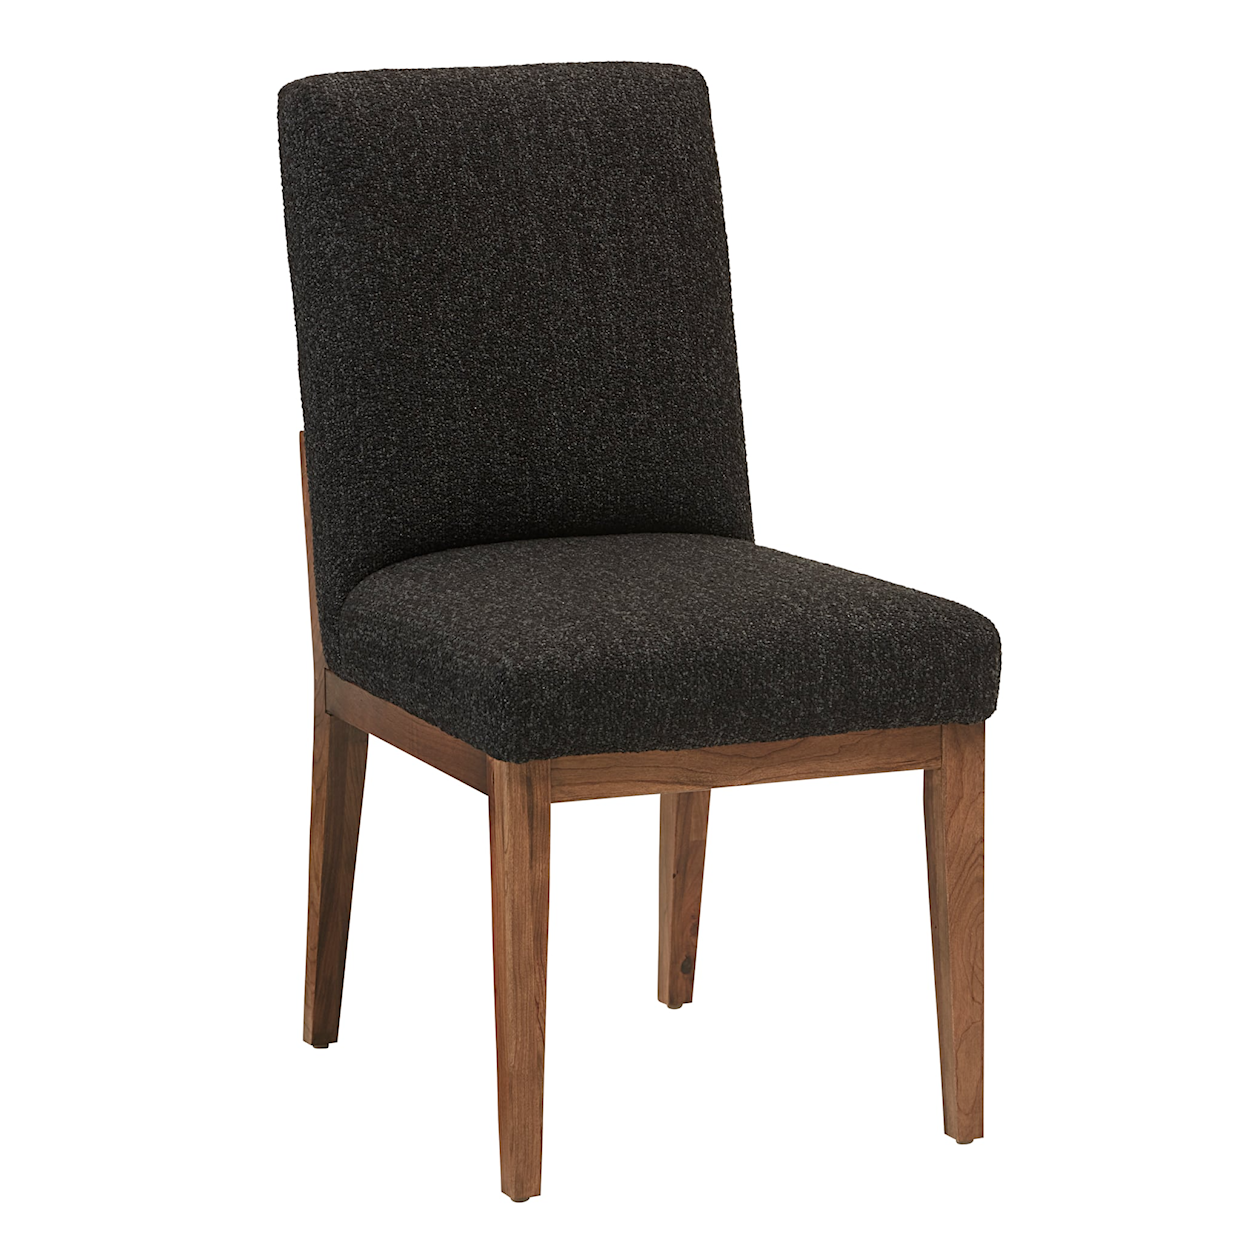 Vaughan Bassett Crafted Cherry - Medium Upholstered Side Dining Chair